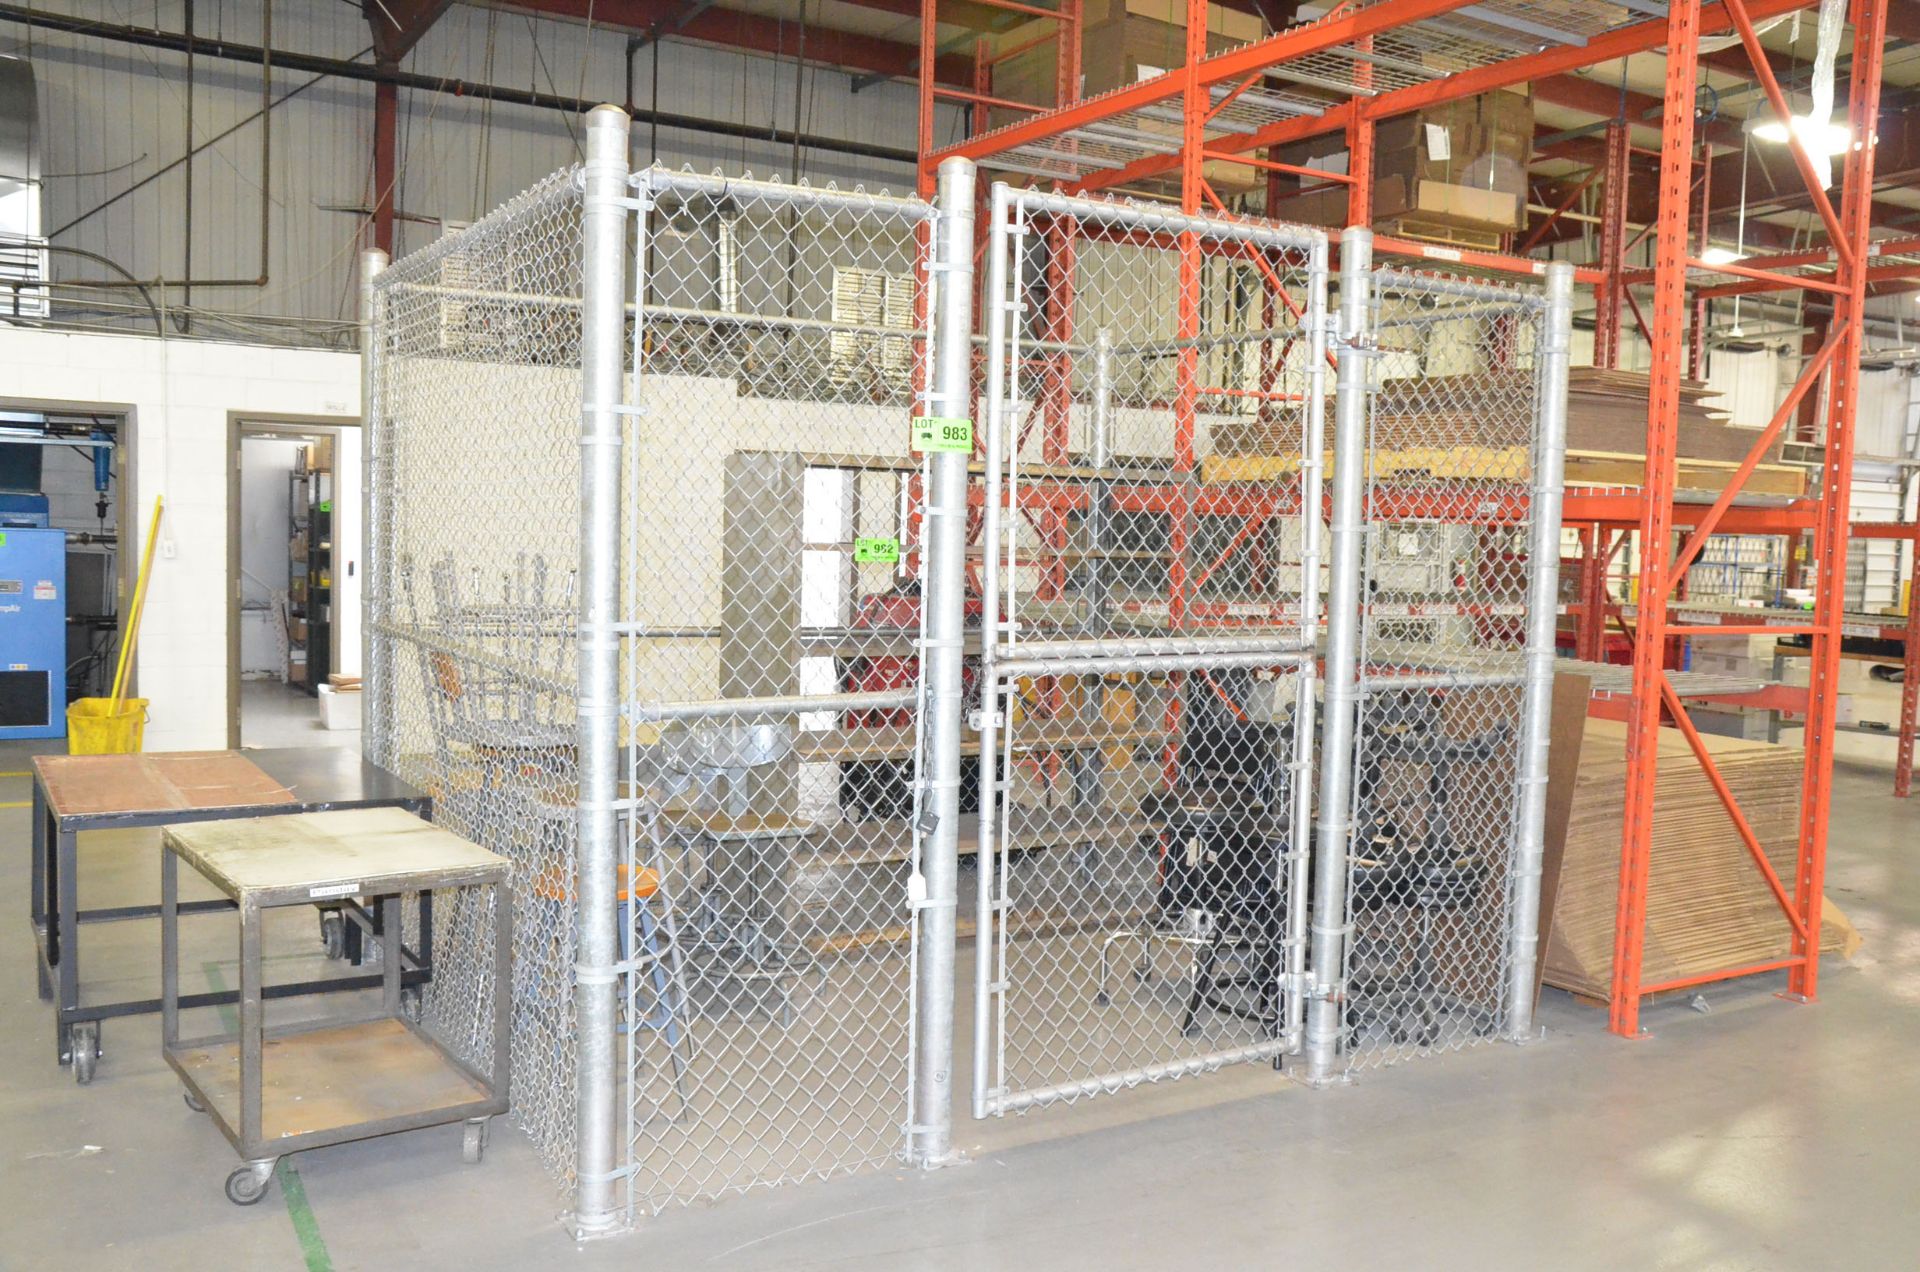 APPROX. 10'X15' SECURITY CAGE, S/N: N/A